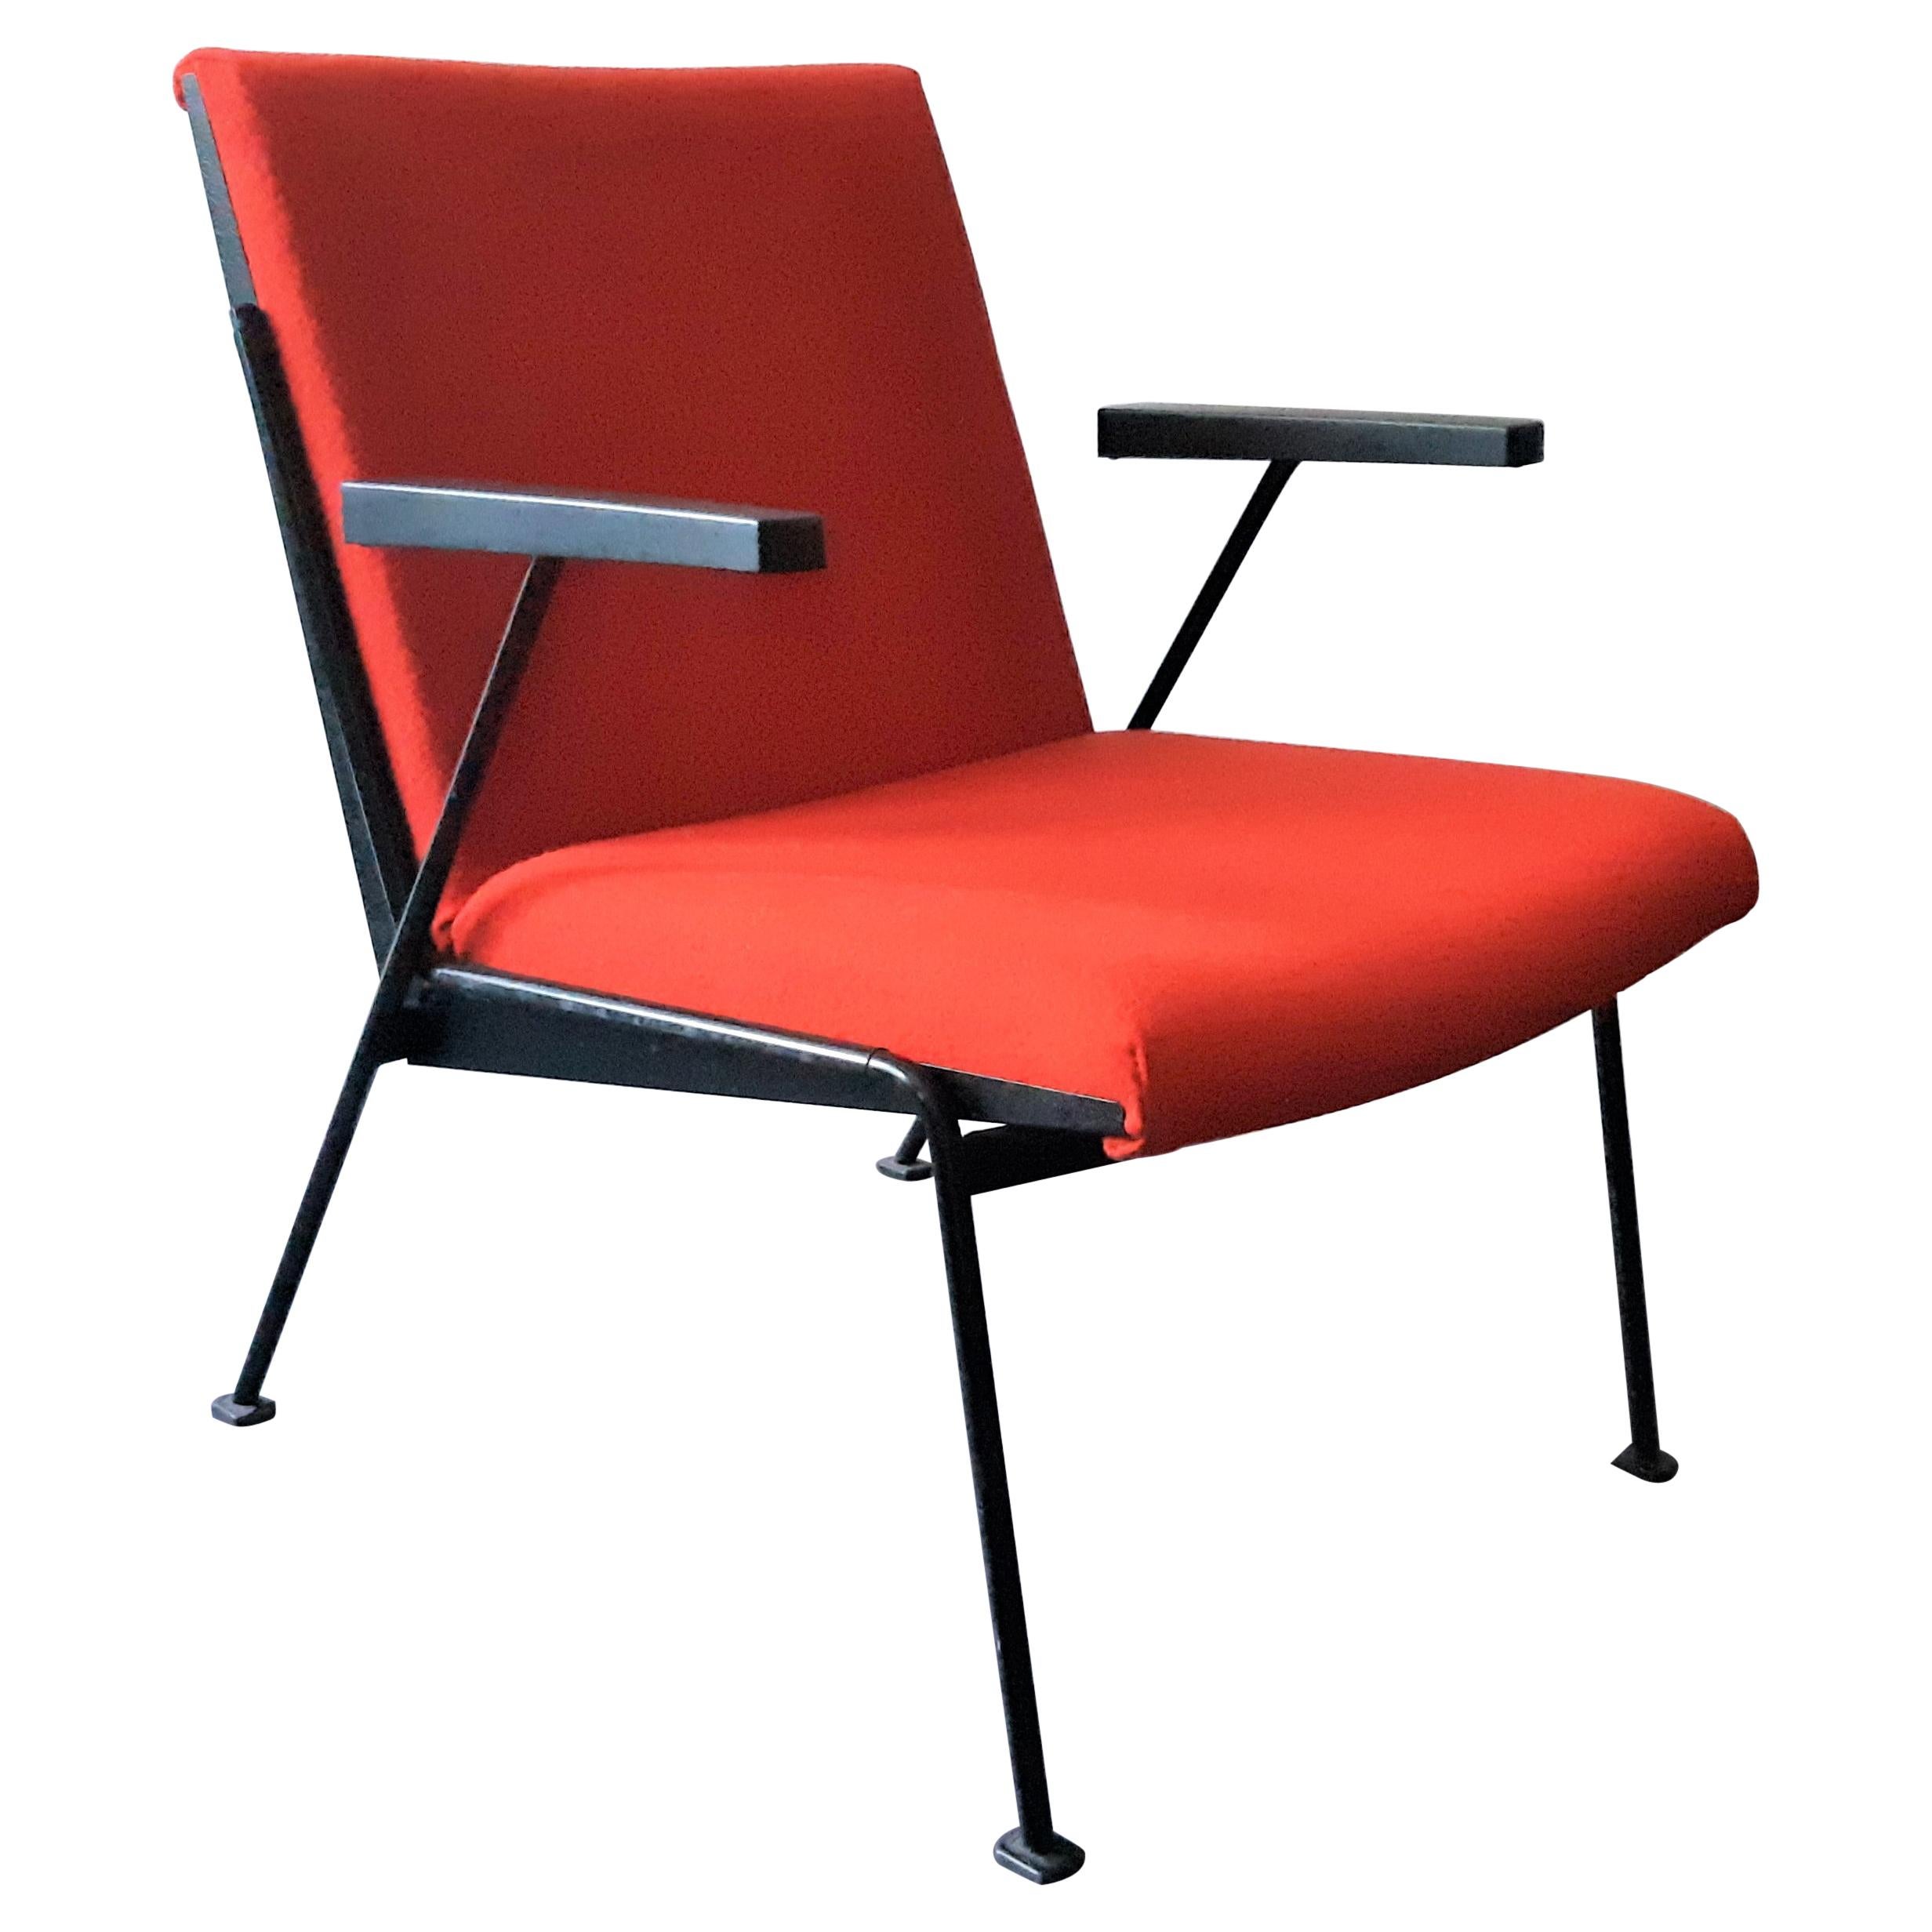 Red 'Oase' Lounge Chair with Armrests by Wim Rietveld for Ahrend, 3 Available